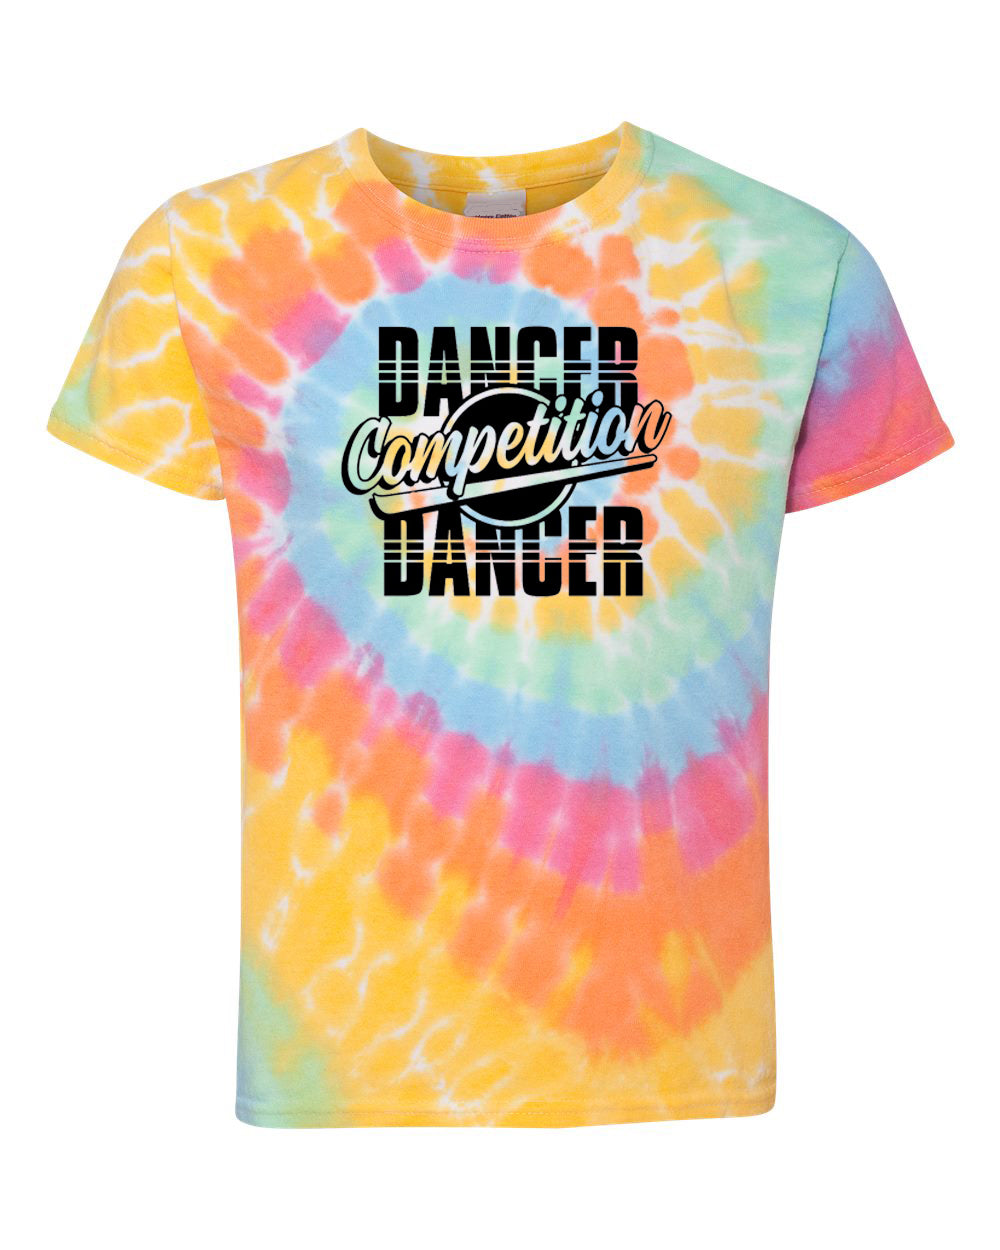 Competition Dancer Adult Tie Dye T-Shirt